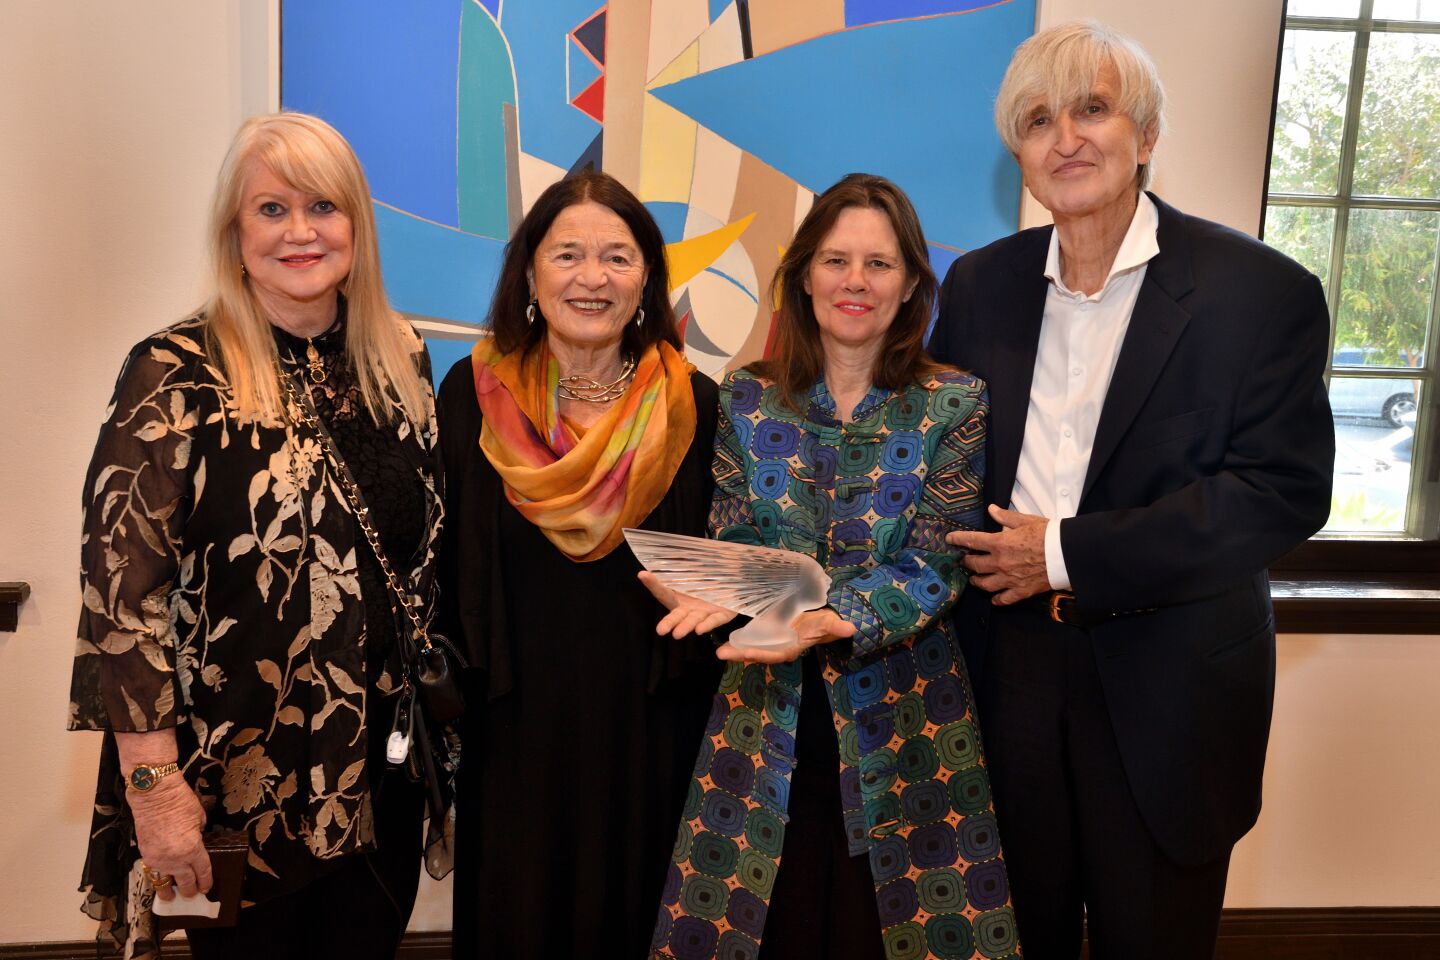 Diana Pickett of Charter 100 International; Erika Torri, executive director of the Athenaeum Music & Arts Library; and Francoise Gilot's daughter Aurelia Engel and her husband, Colas Engel, attend "Gilot 100," a private exhibit of Gilot's art April 24 at the Athenaeum.